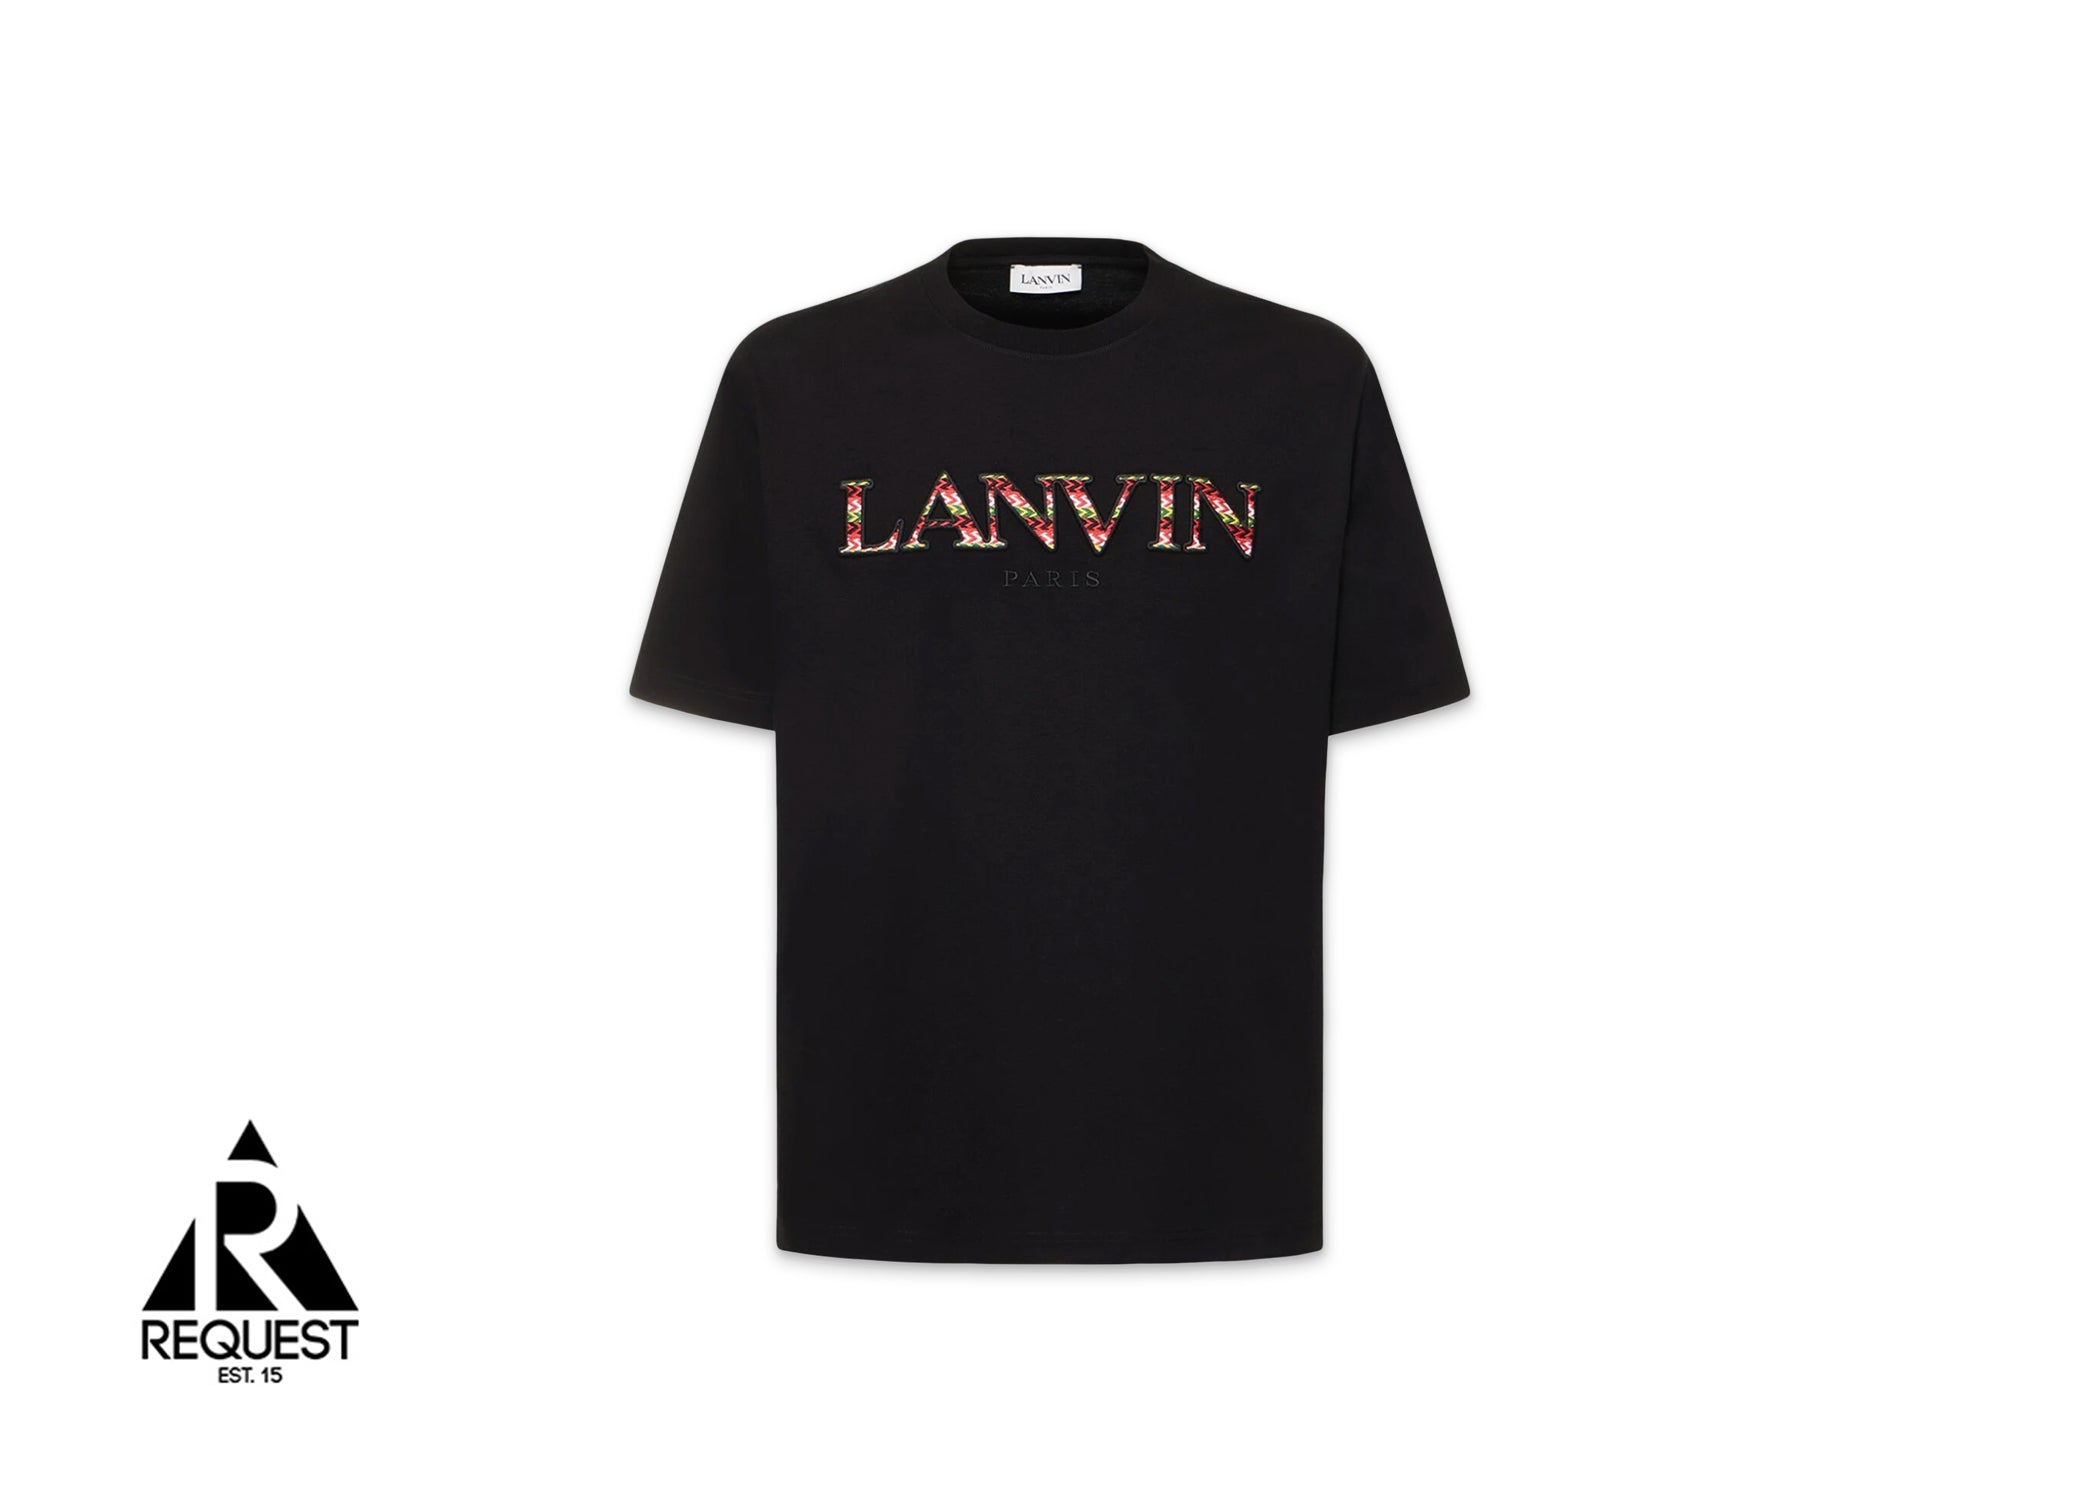 Lanvin Classic Curb Embroidered Tee "Black"